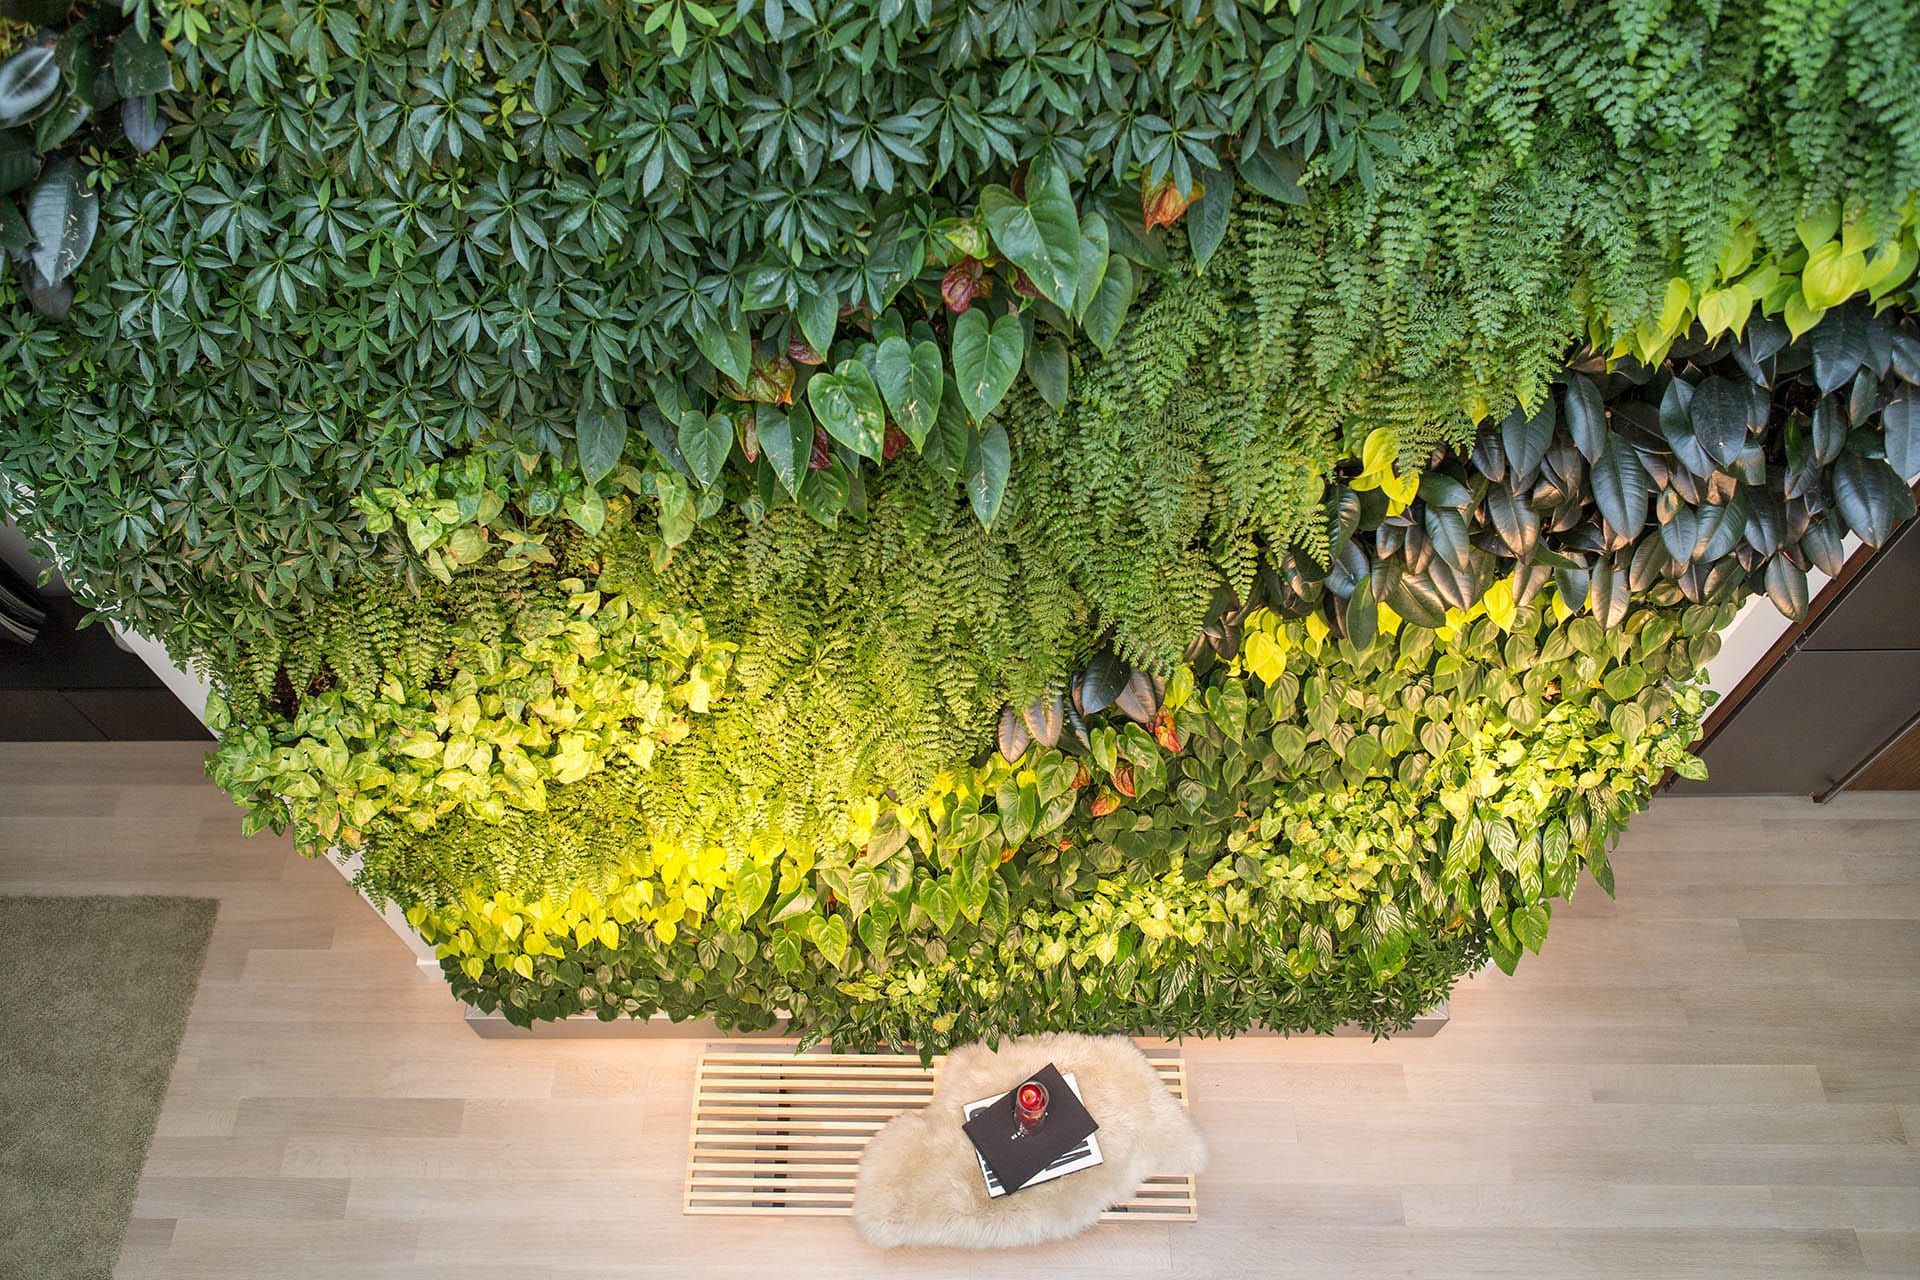 Two-story living wall viewed from the top looking down.